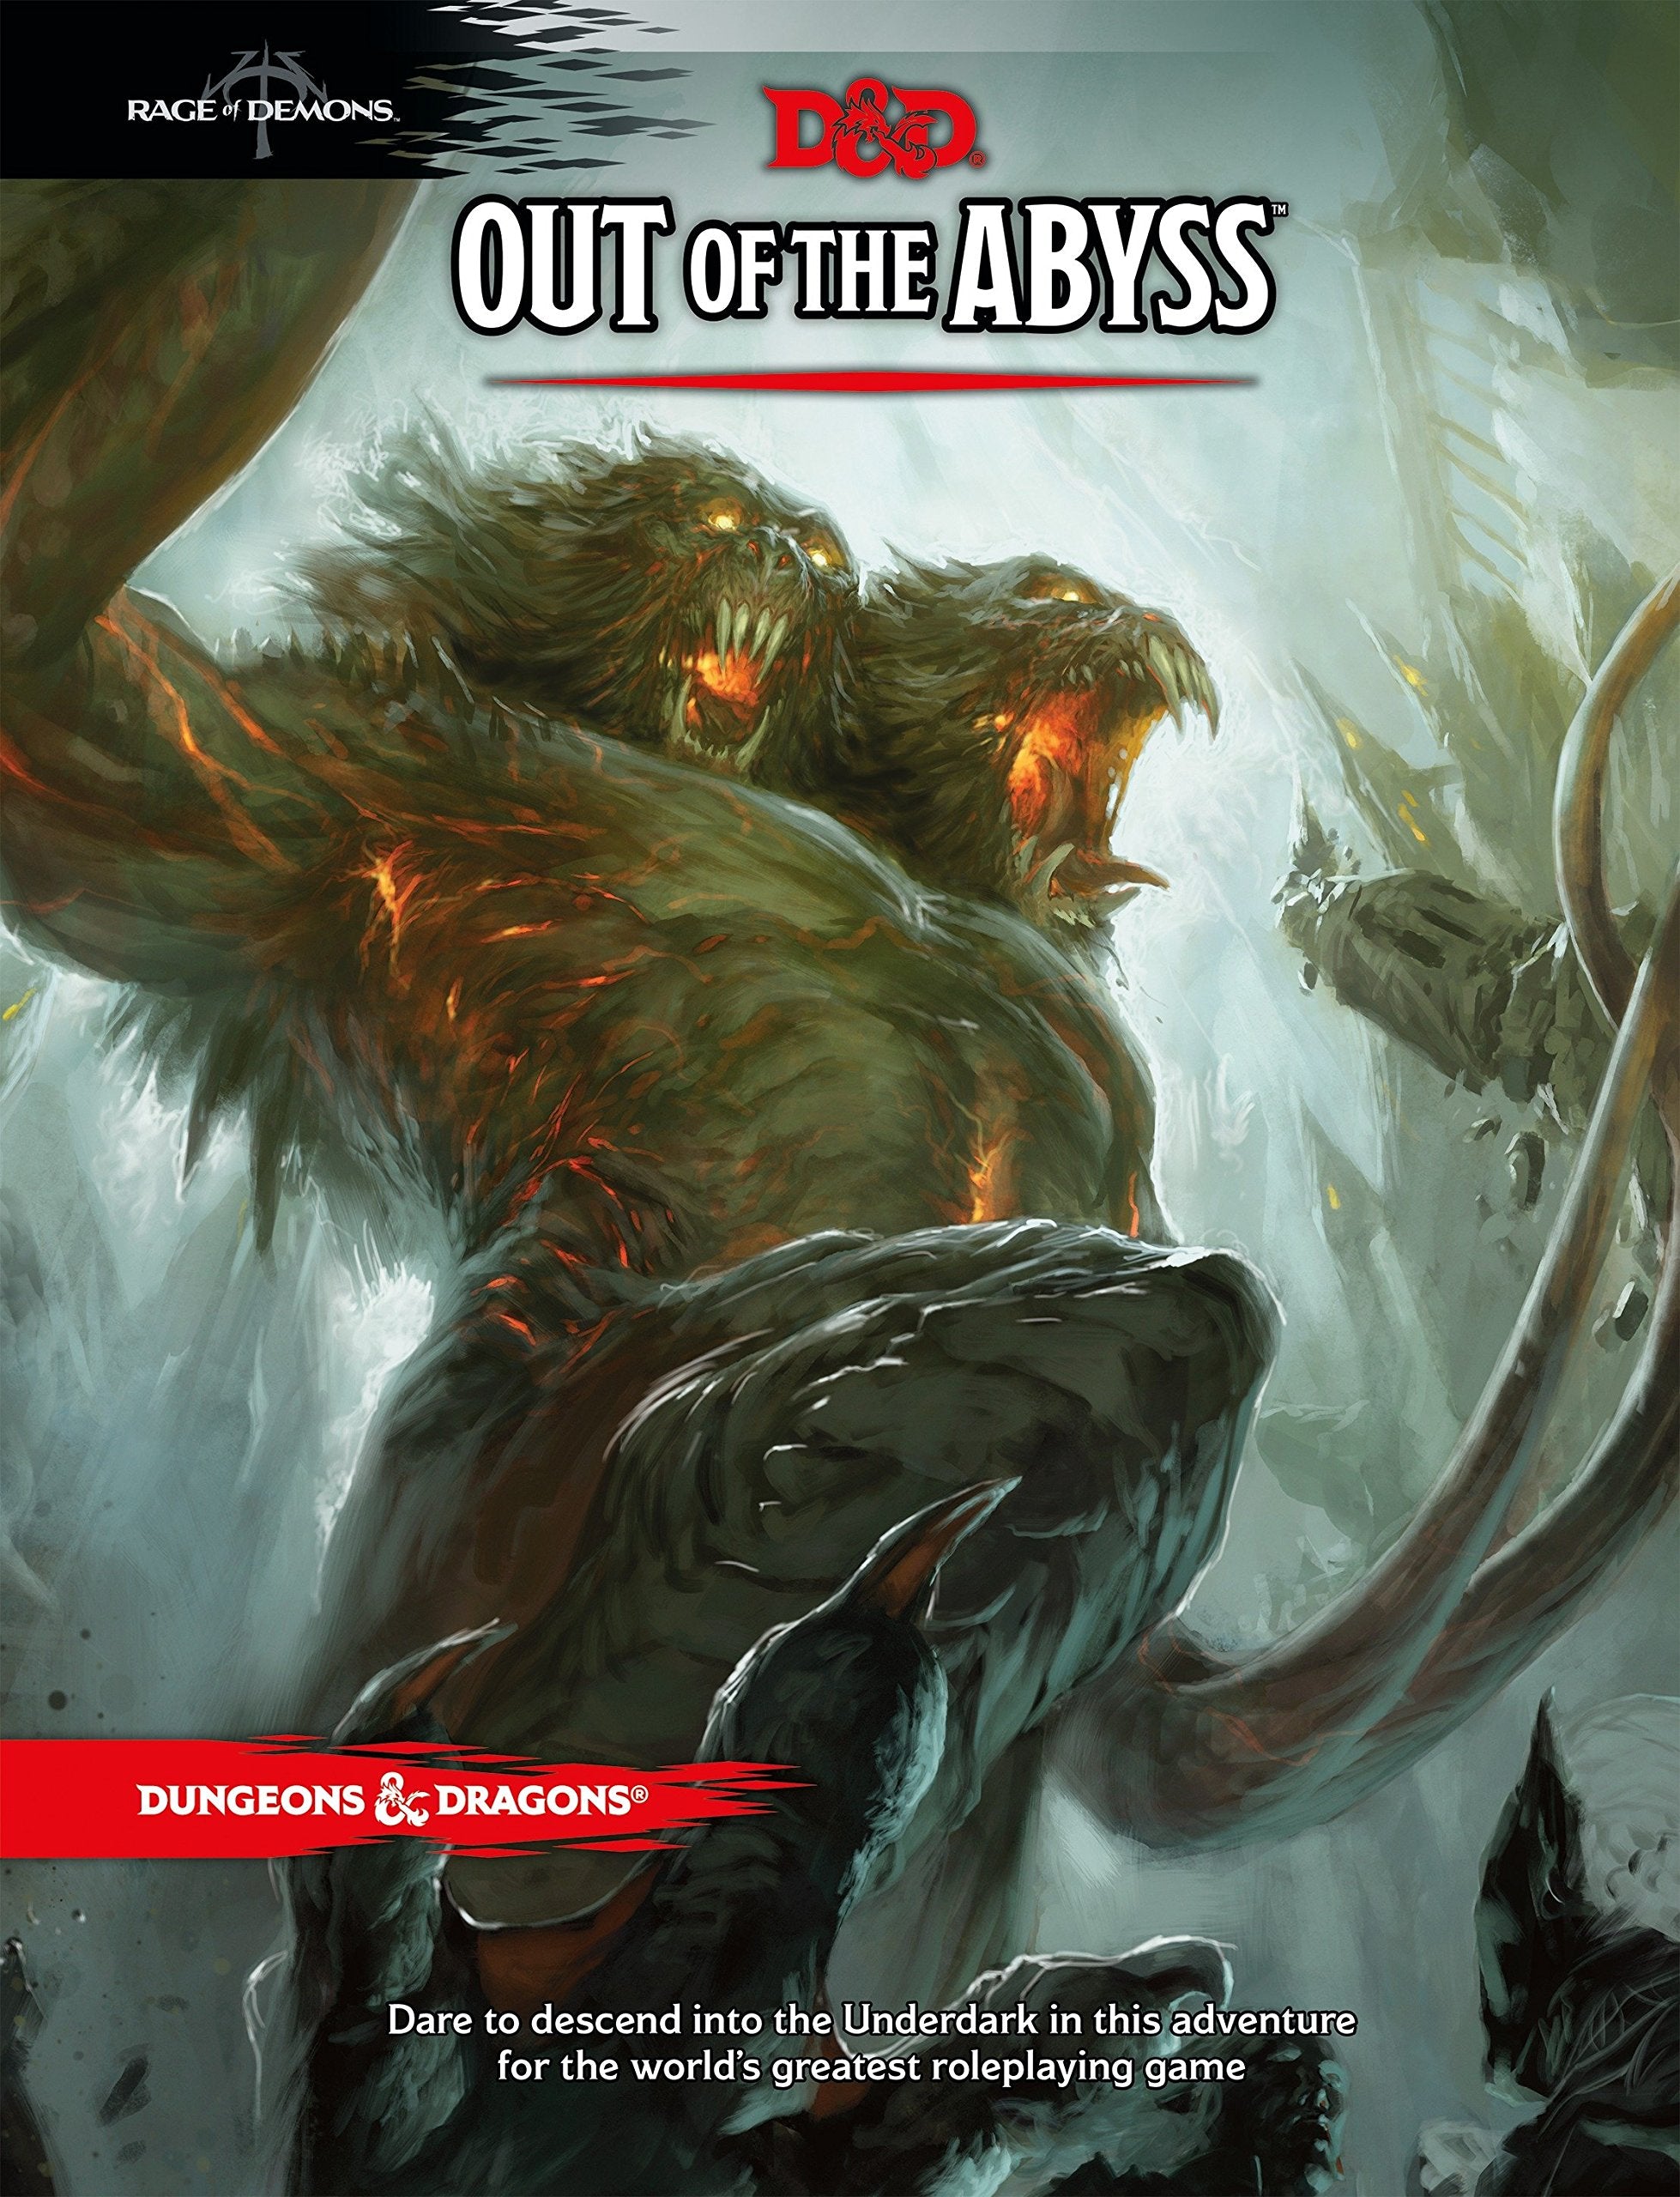 D&D RPG: Out of the Abyss